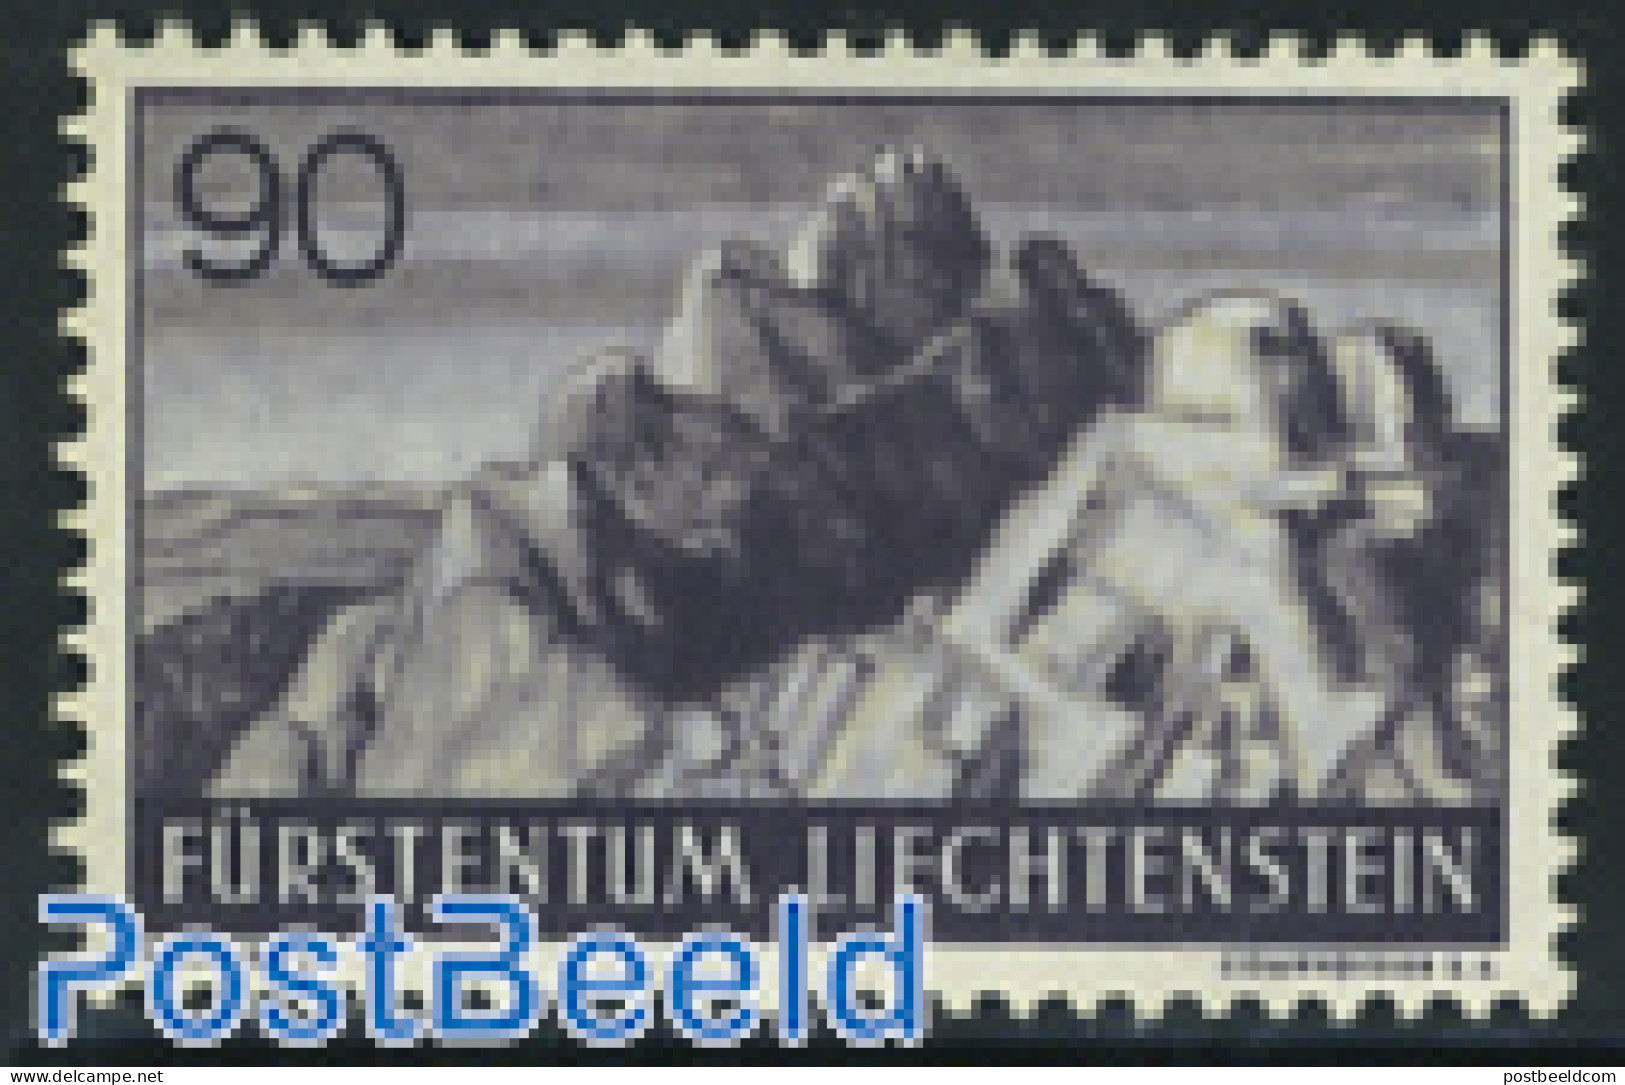 Liechtenstein 1937 90Rp, Stamp Out Of Set, Mint NH, History - Geology - Nuovi